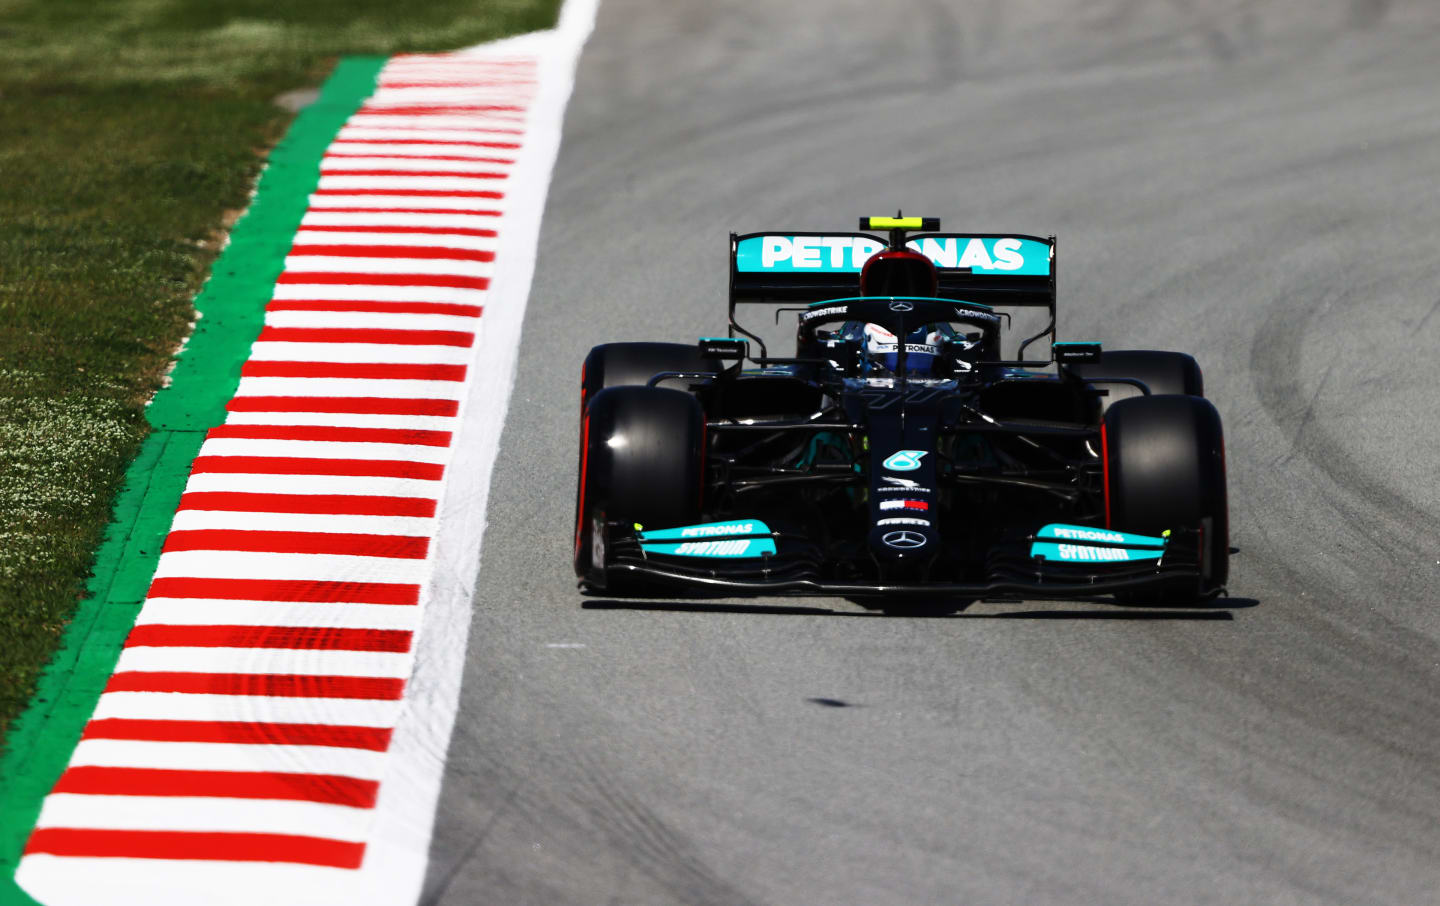 BARCELONA, SPAIN - MAY 08: Valtteri Bottas of Finland driving the (77) Mercedes AMG Petronas F1 Team Mercedes W12 on track during qualifying for the F1 Grand Prix of Spain at Circuit de Barcelona-Catalunya on May 08, 2021 in Barcelona, Spain. (Photo by Bryn Lennon/Getty Images)